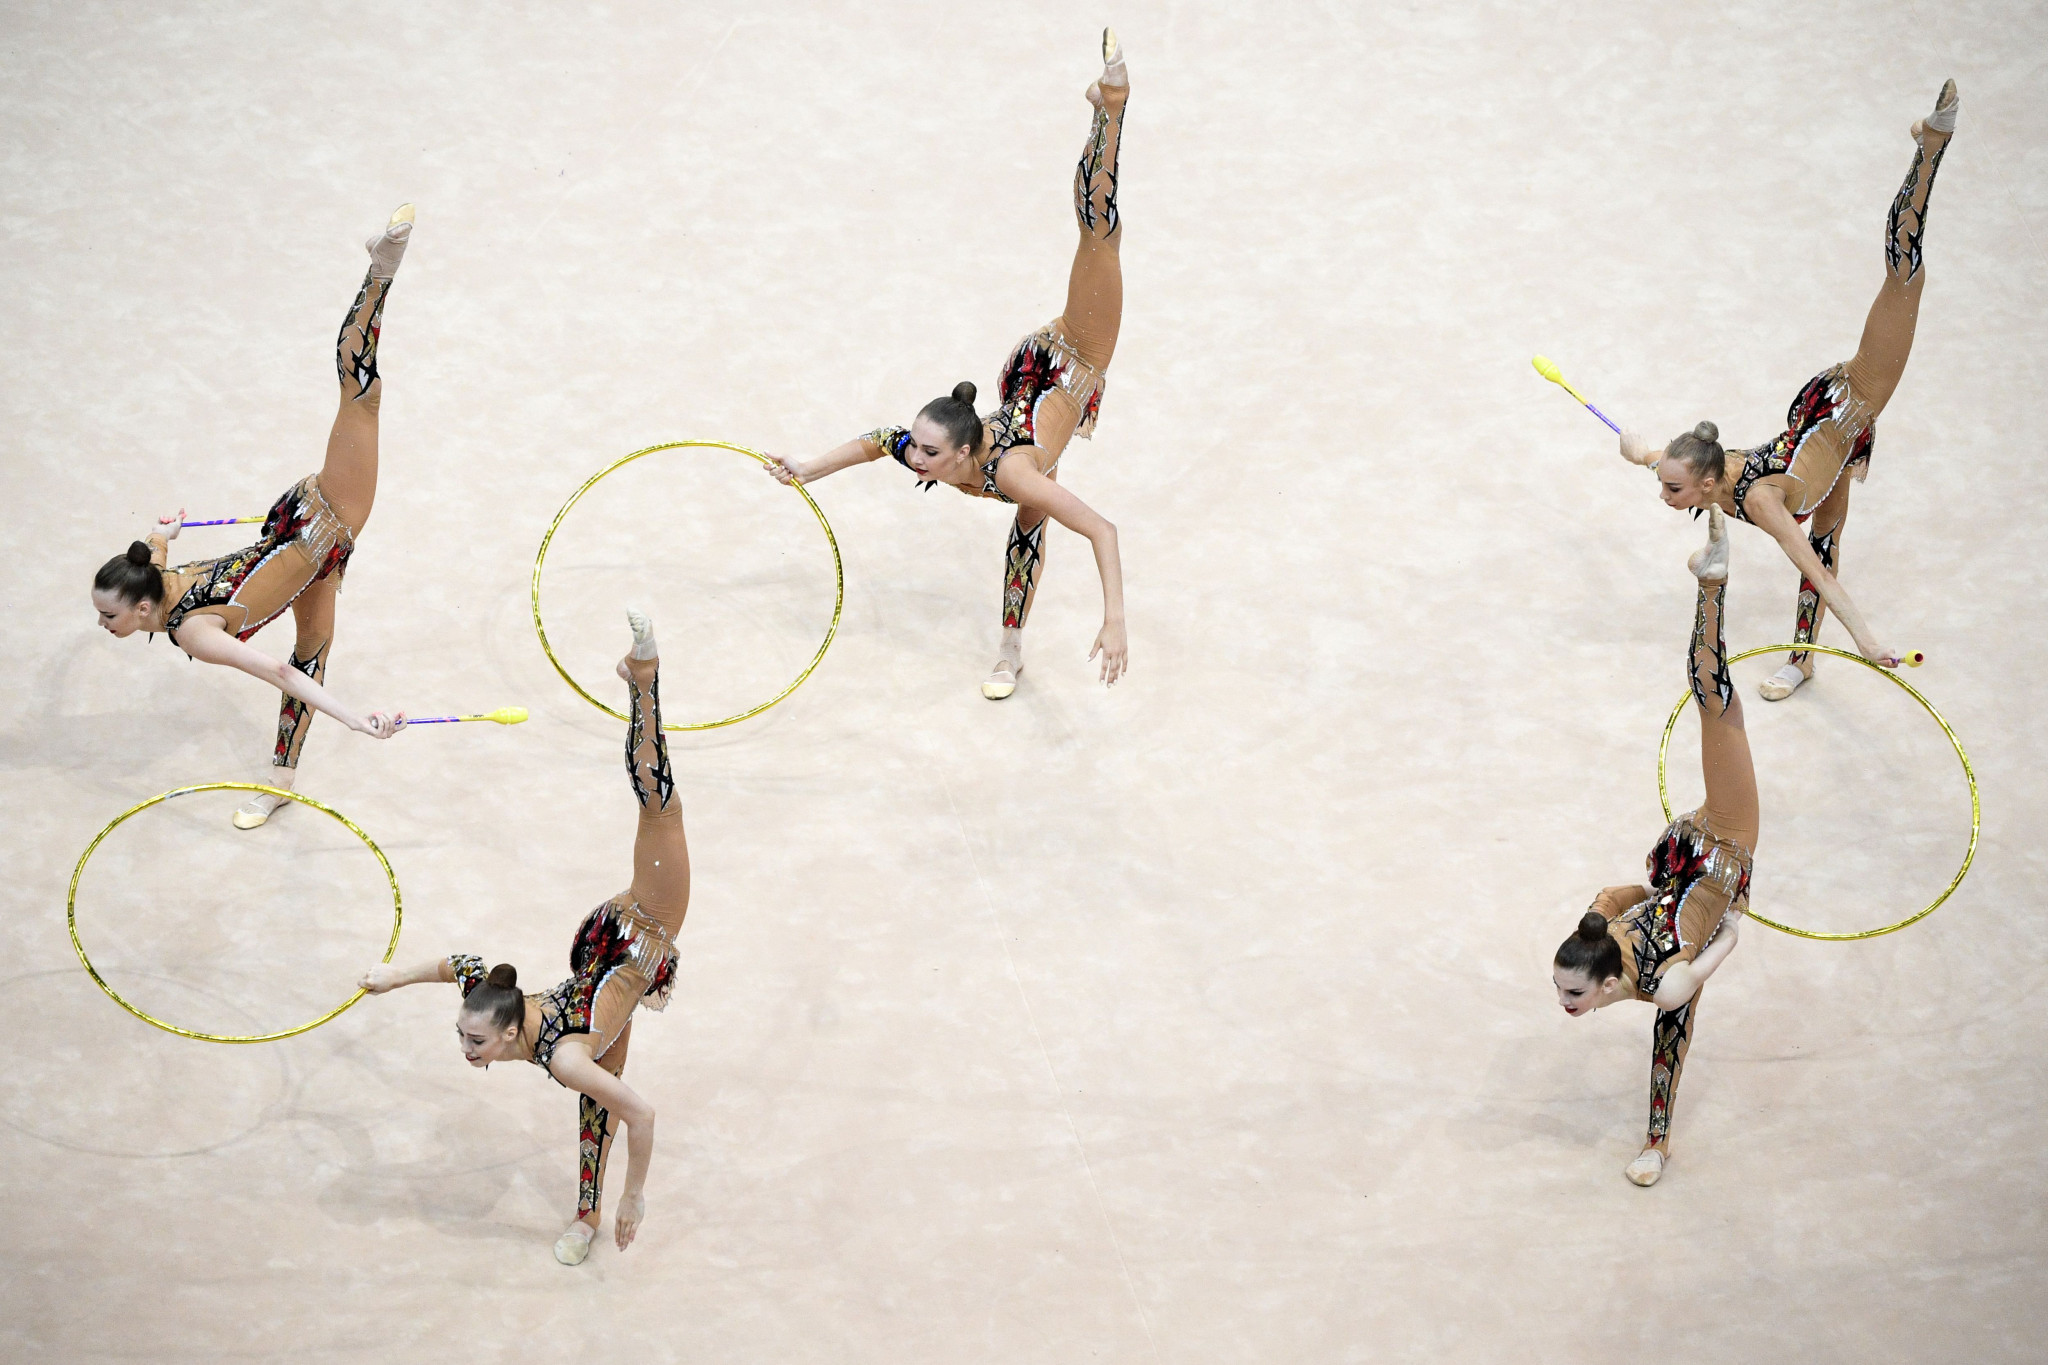 Conditions for European Rhythmic Gymnastics Championships "unacceptable" for Russian athletes